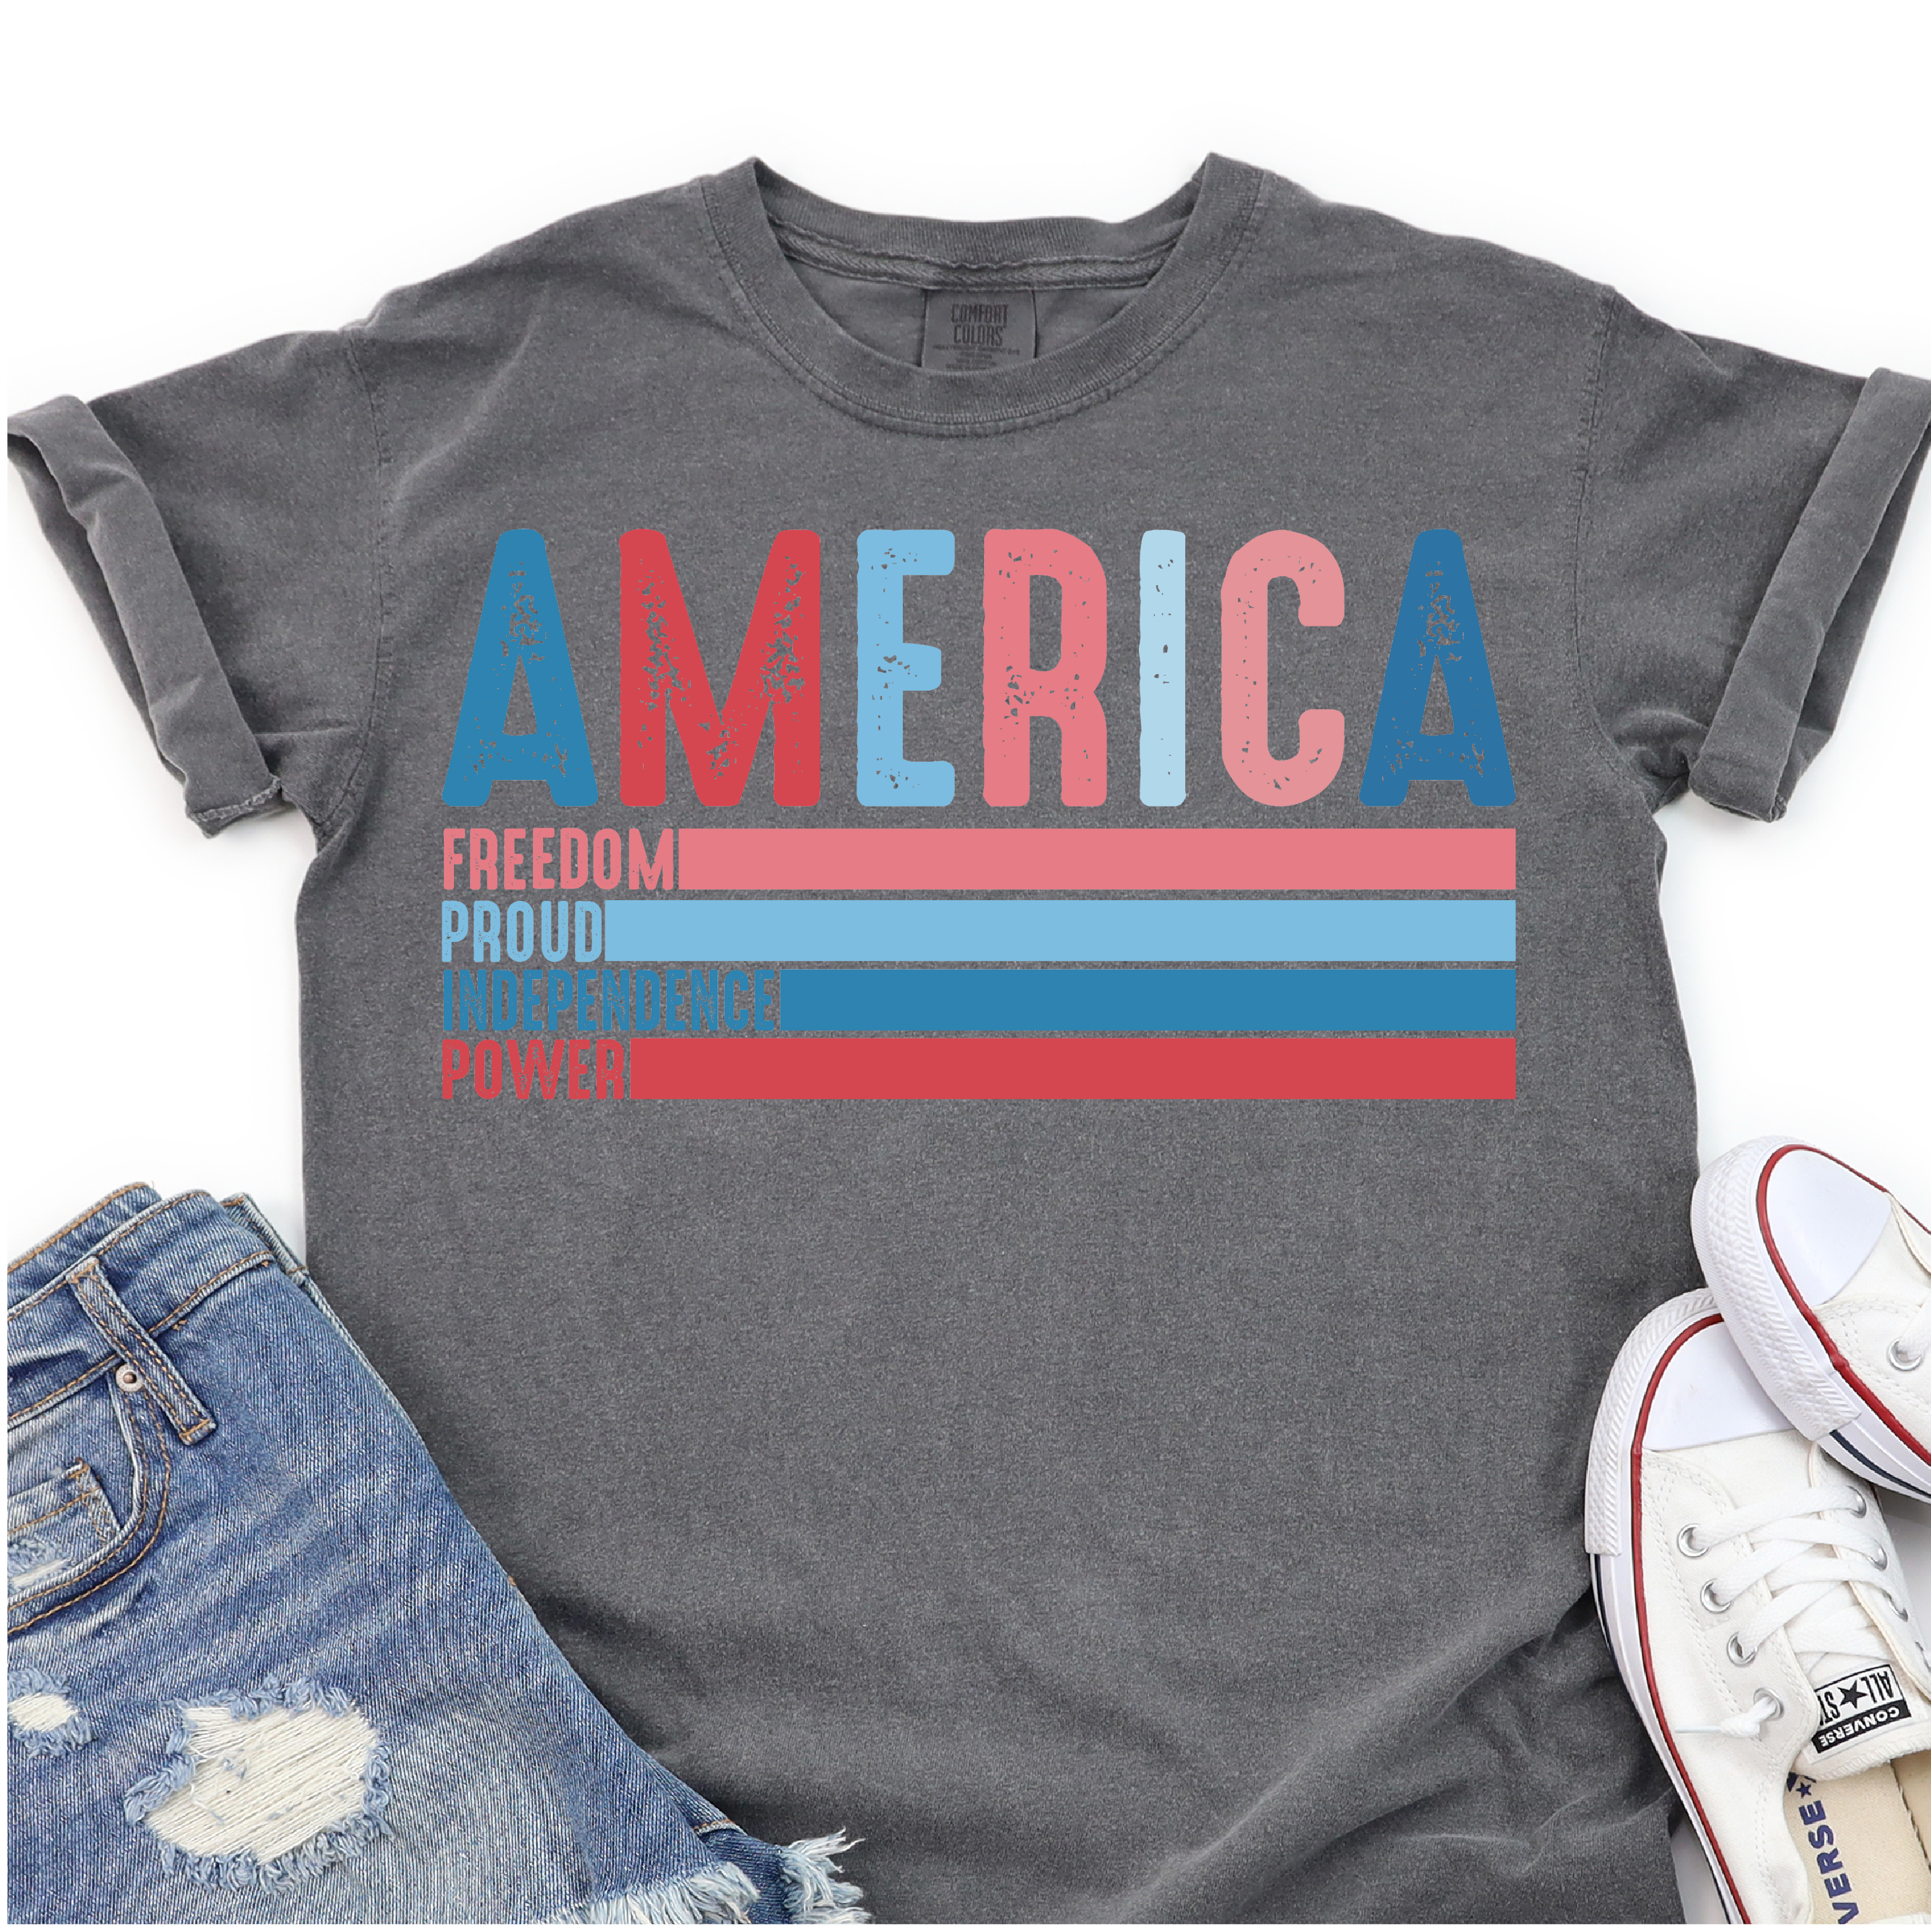 America Print - Freedom - Proud - Independence - Power - 4th of July DTF Transfer - Independence Day T-shirt Transfer Nashville Design House